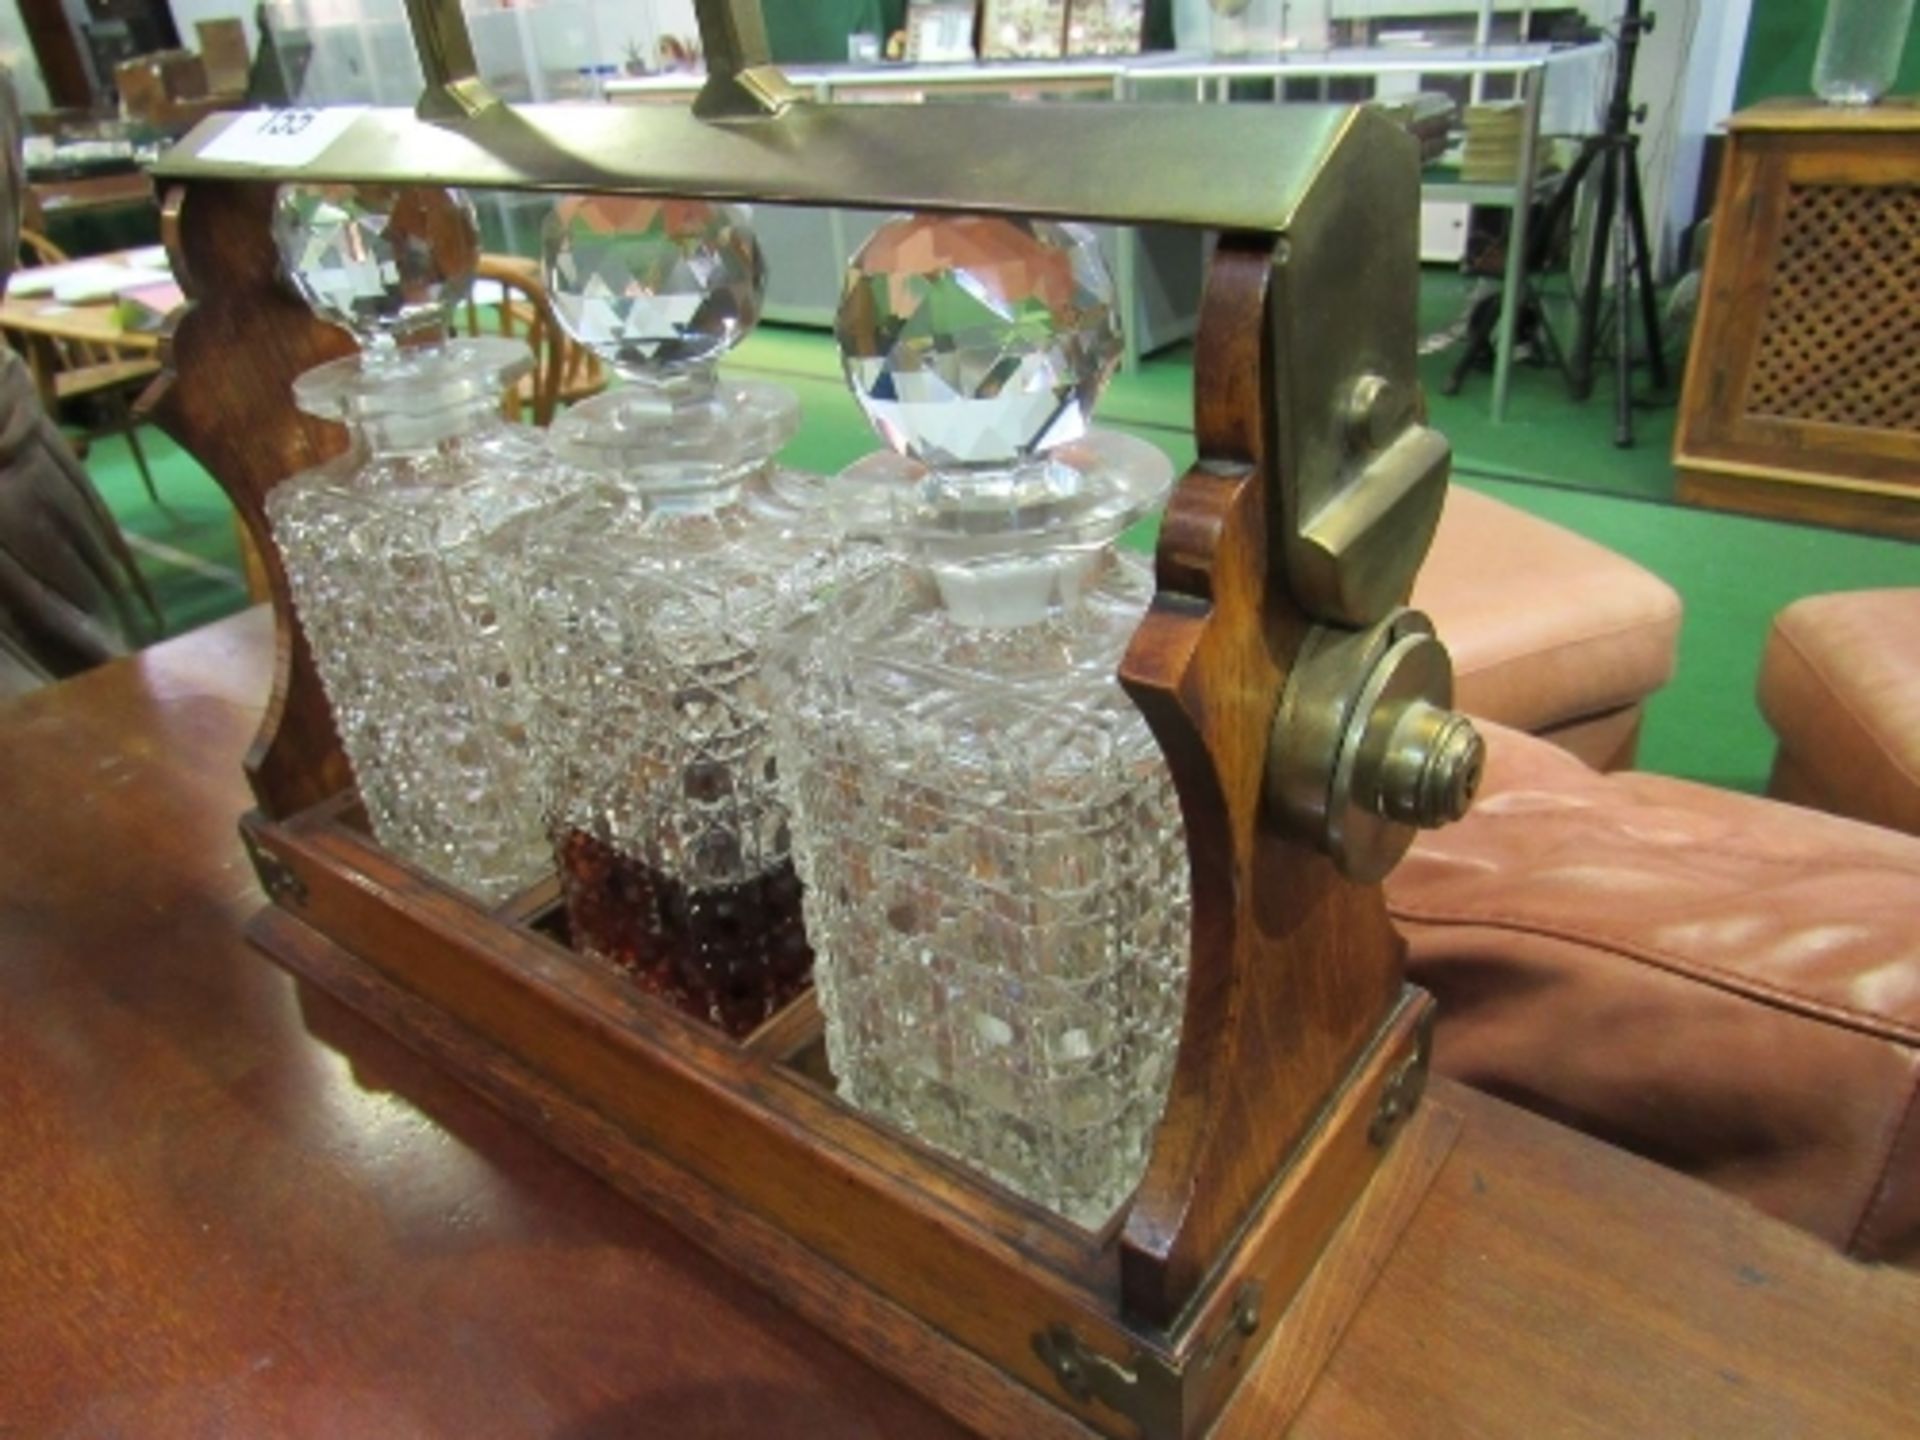 Brass & oak Tantalus with 3 decanters (1 decanter a/f). Estimate £20-30 - Image 2 of 5